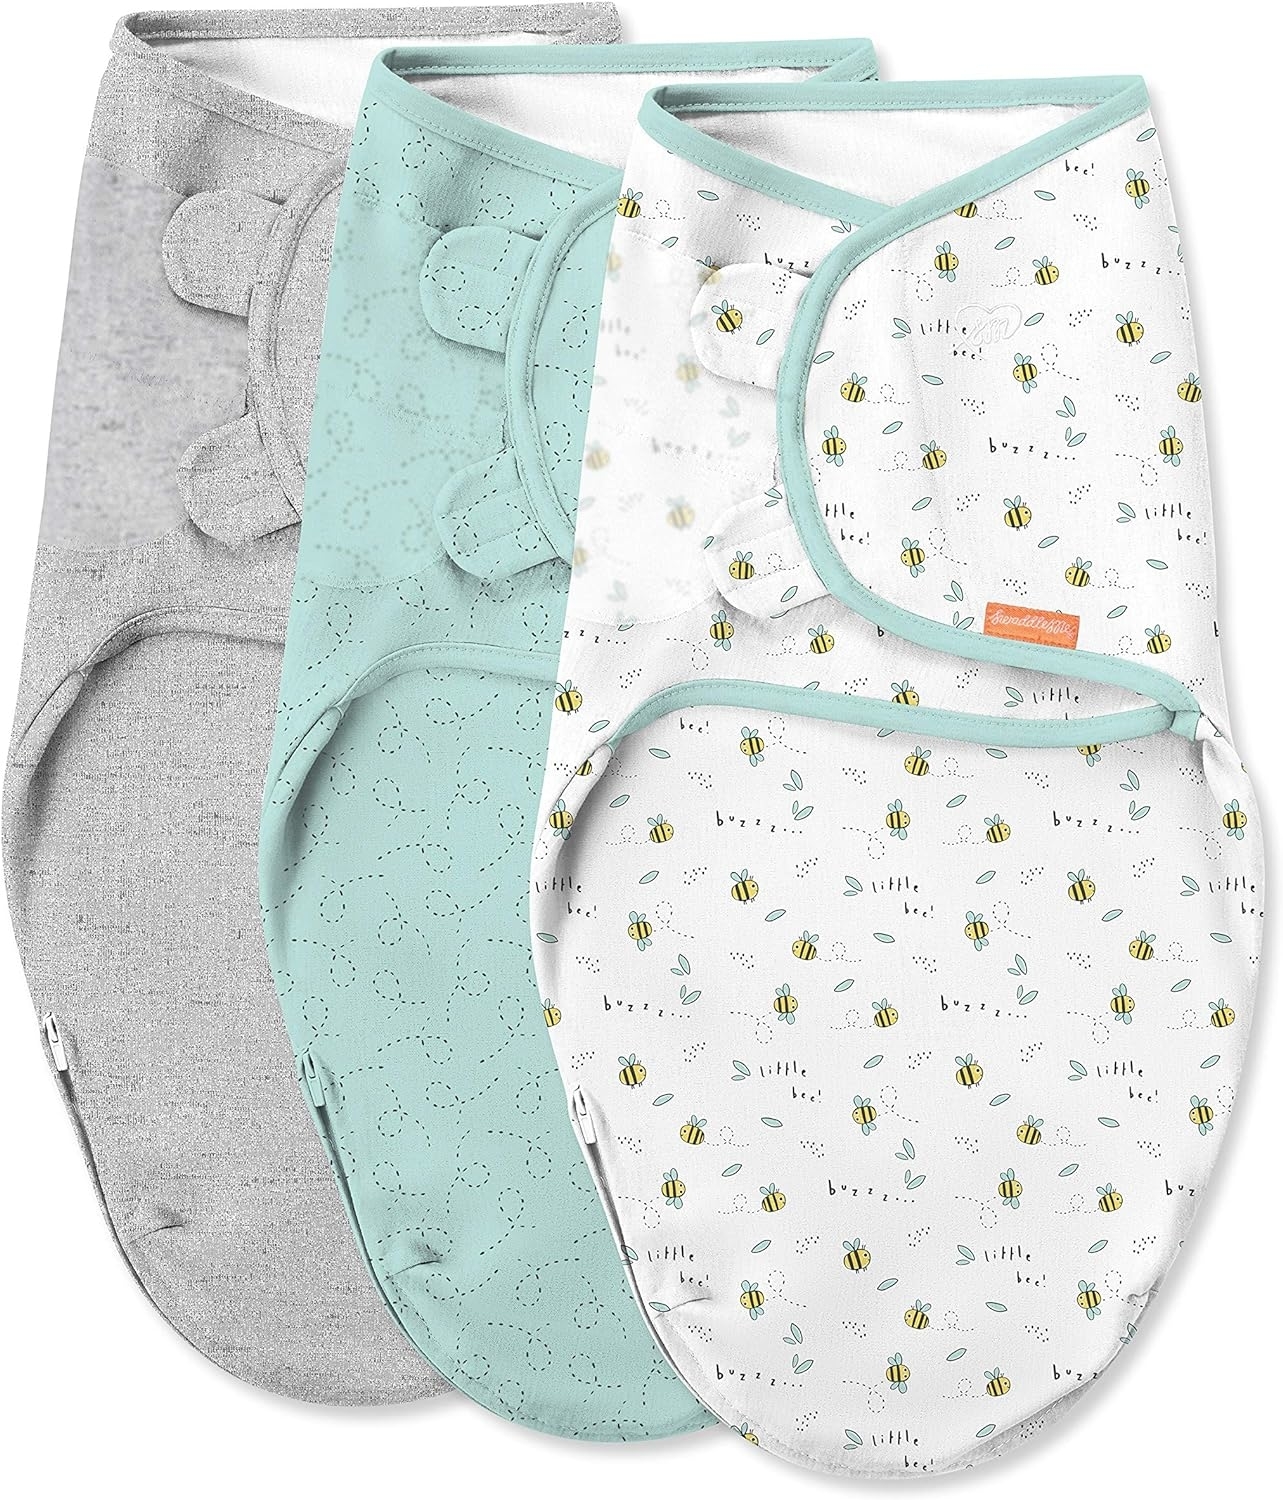 The swaddles in grey, blue swirl, and a bee print